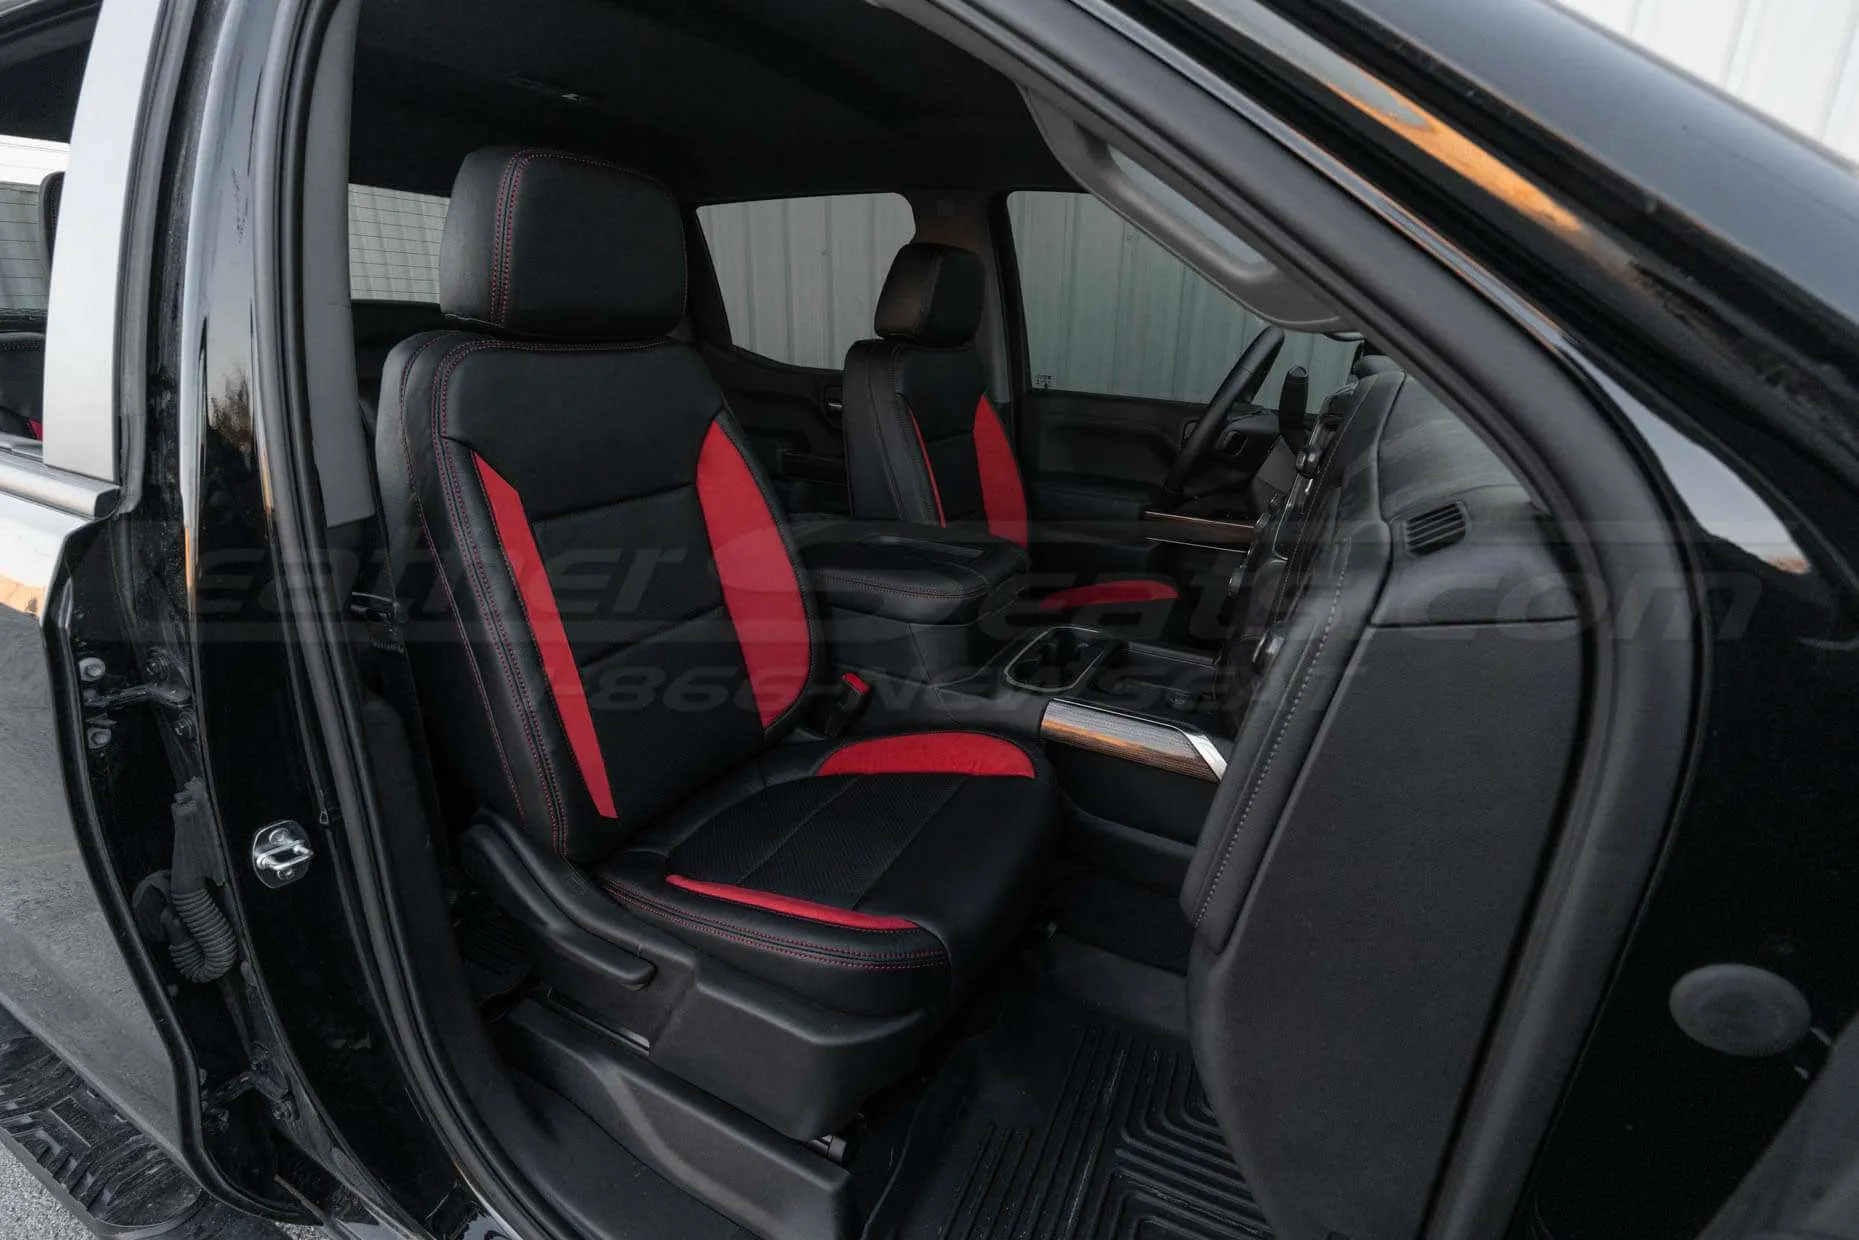 Chevrolet Silverado Crew Can Installed Leather Seats - Black & Red - Front passenger seat - Wide angle